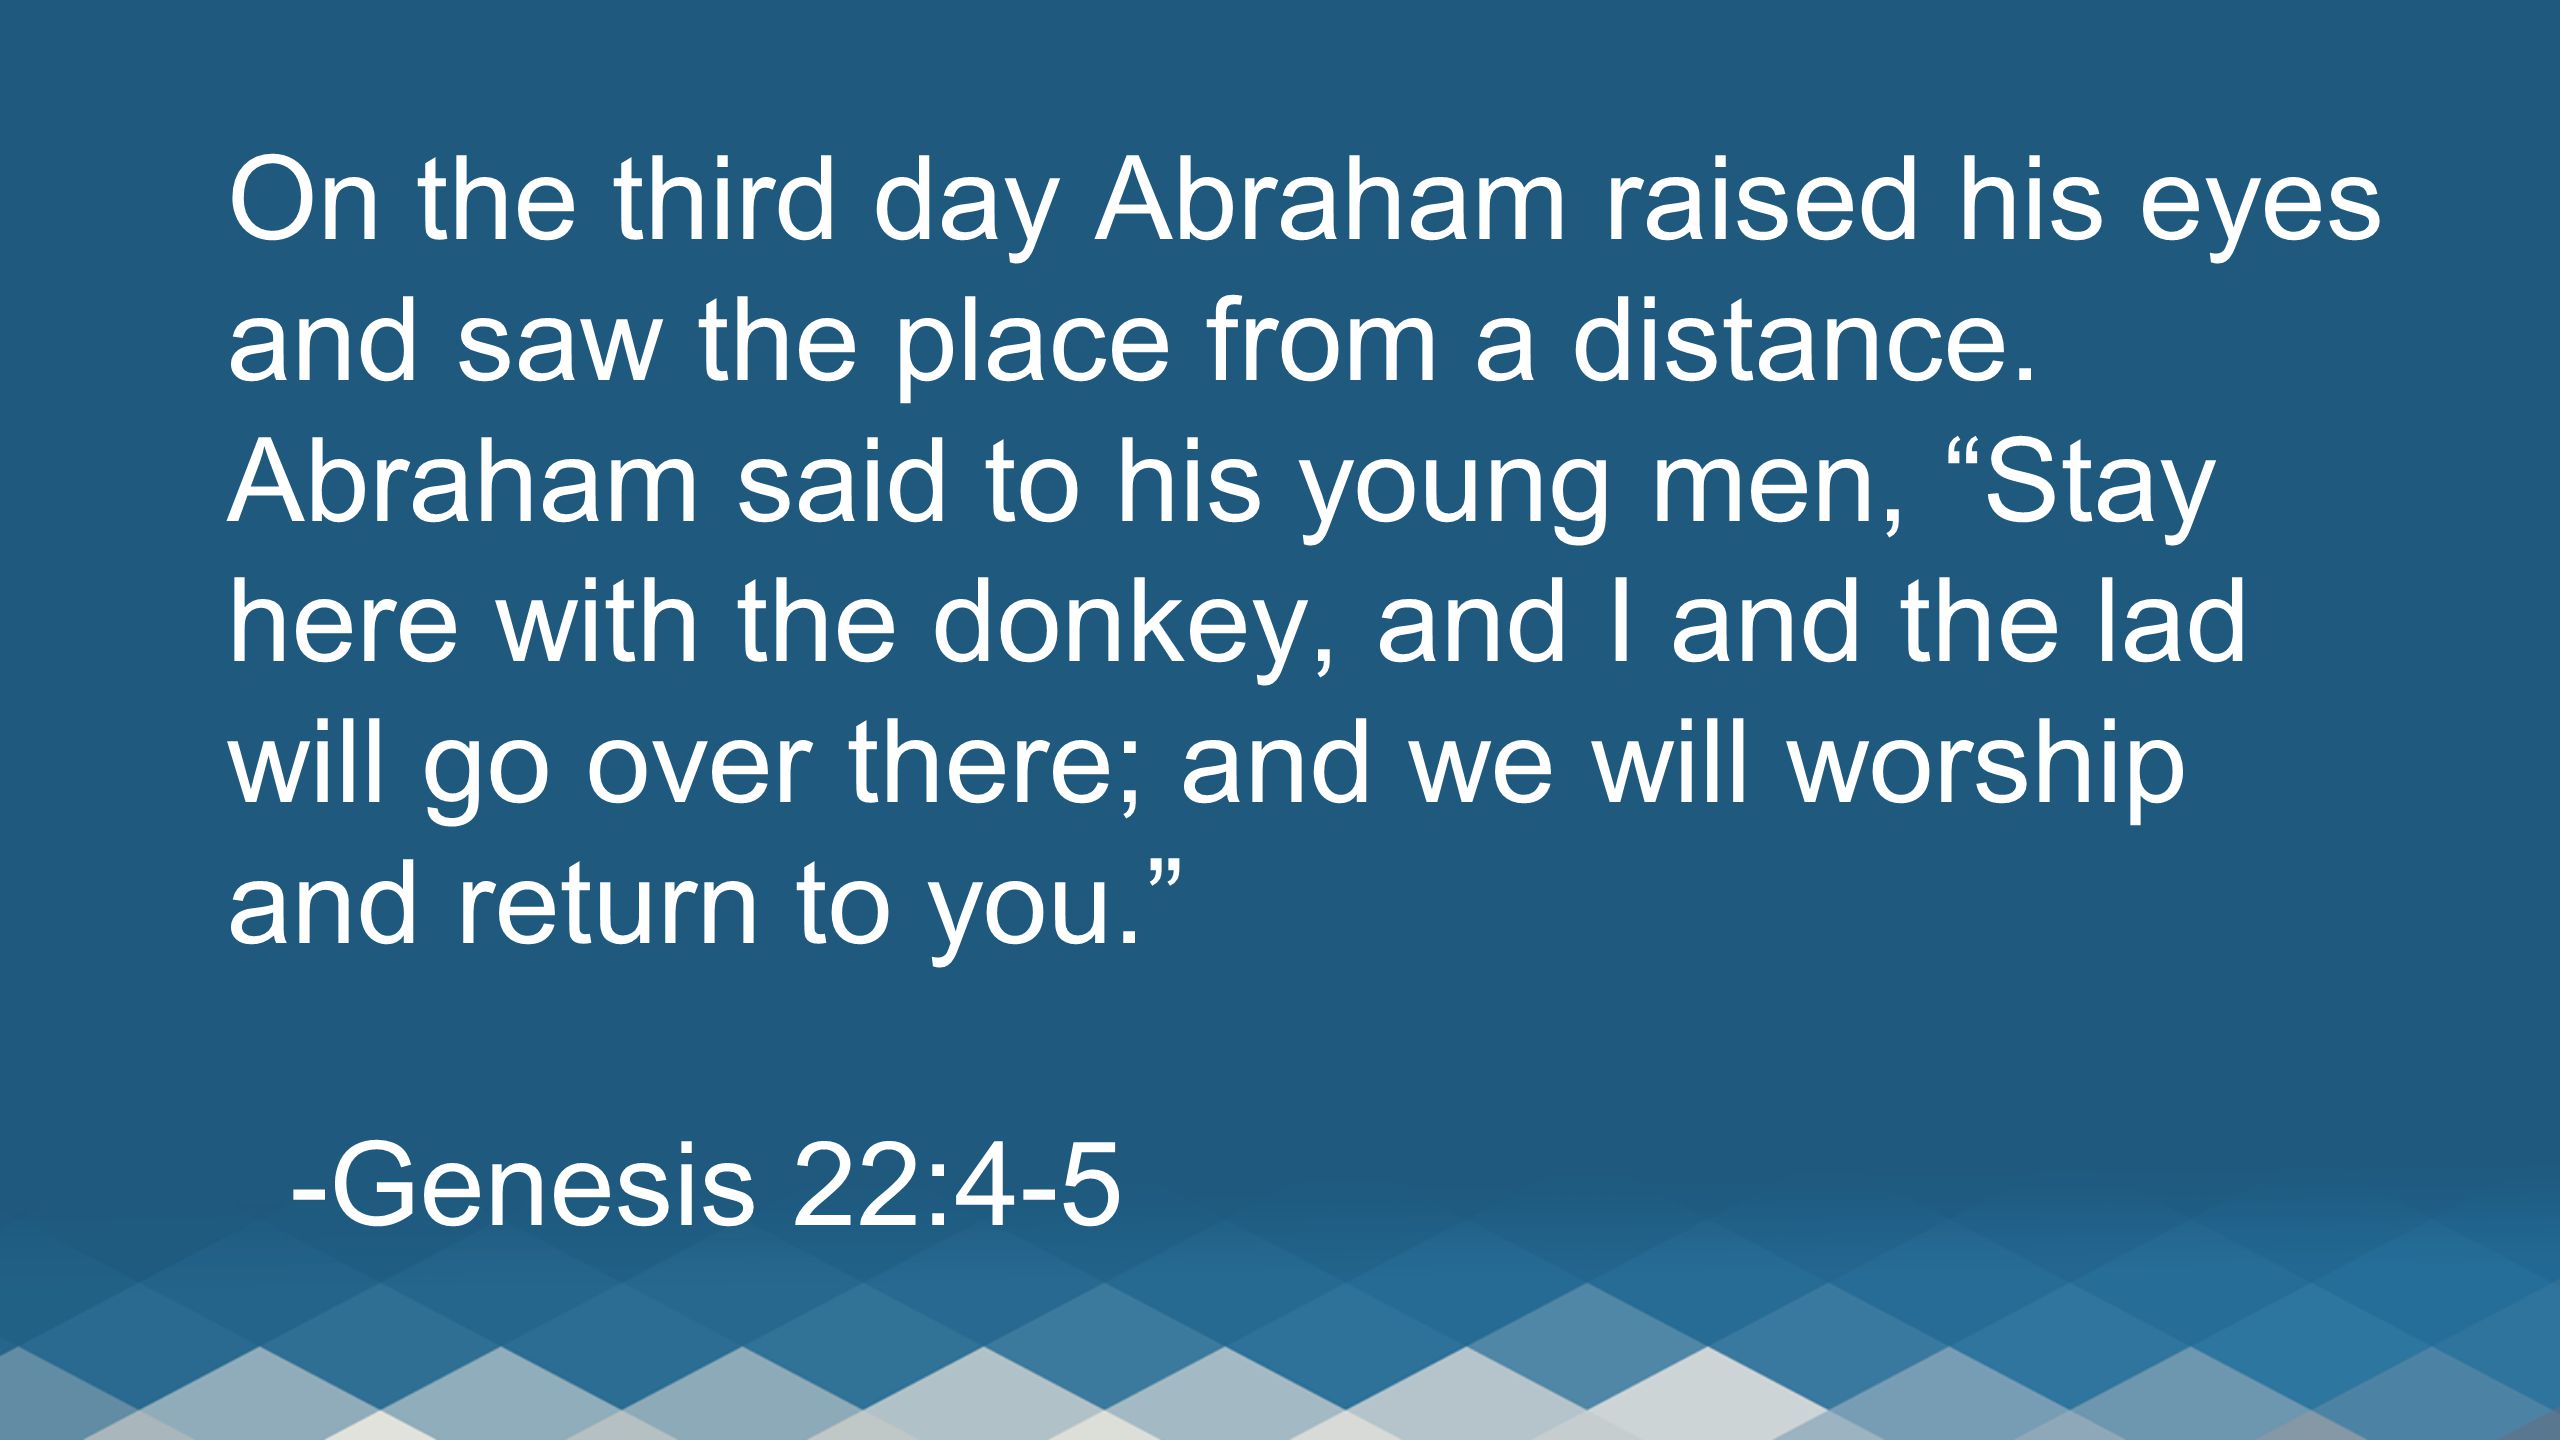 On the third day Abraham raised his eyes and saw the place from a distance.